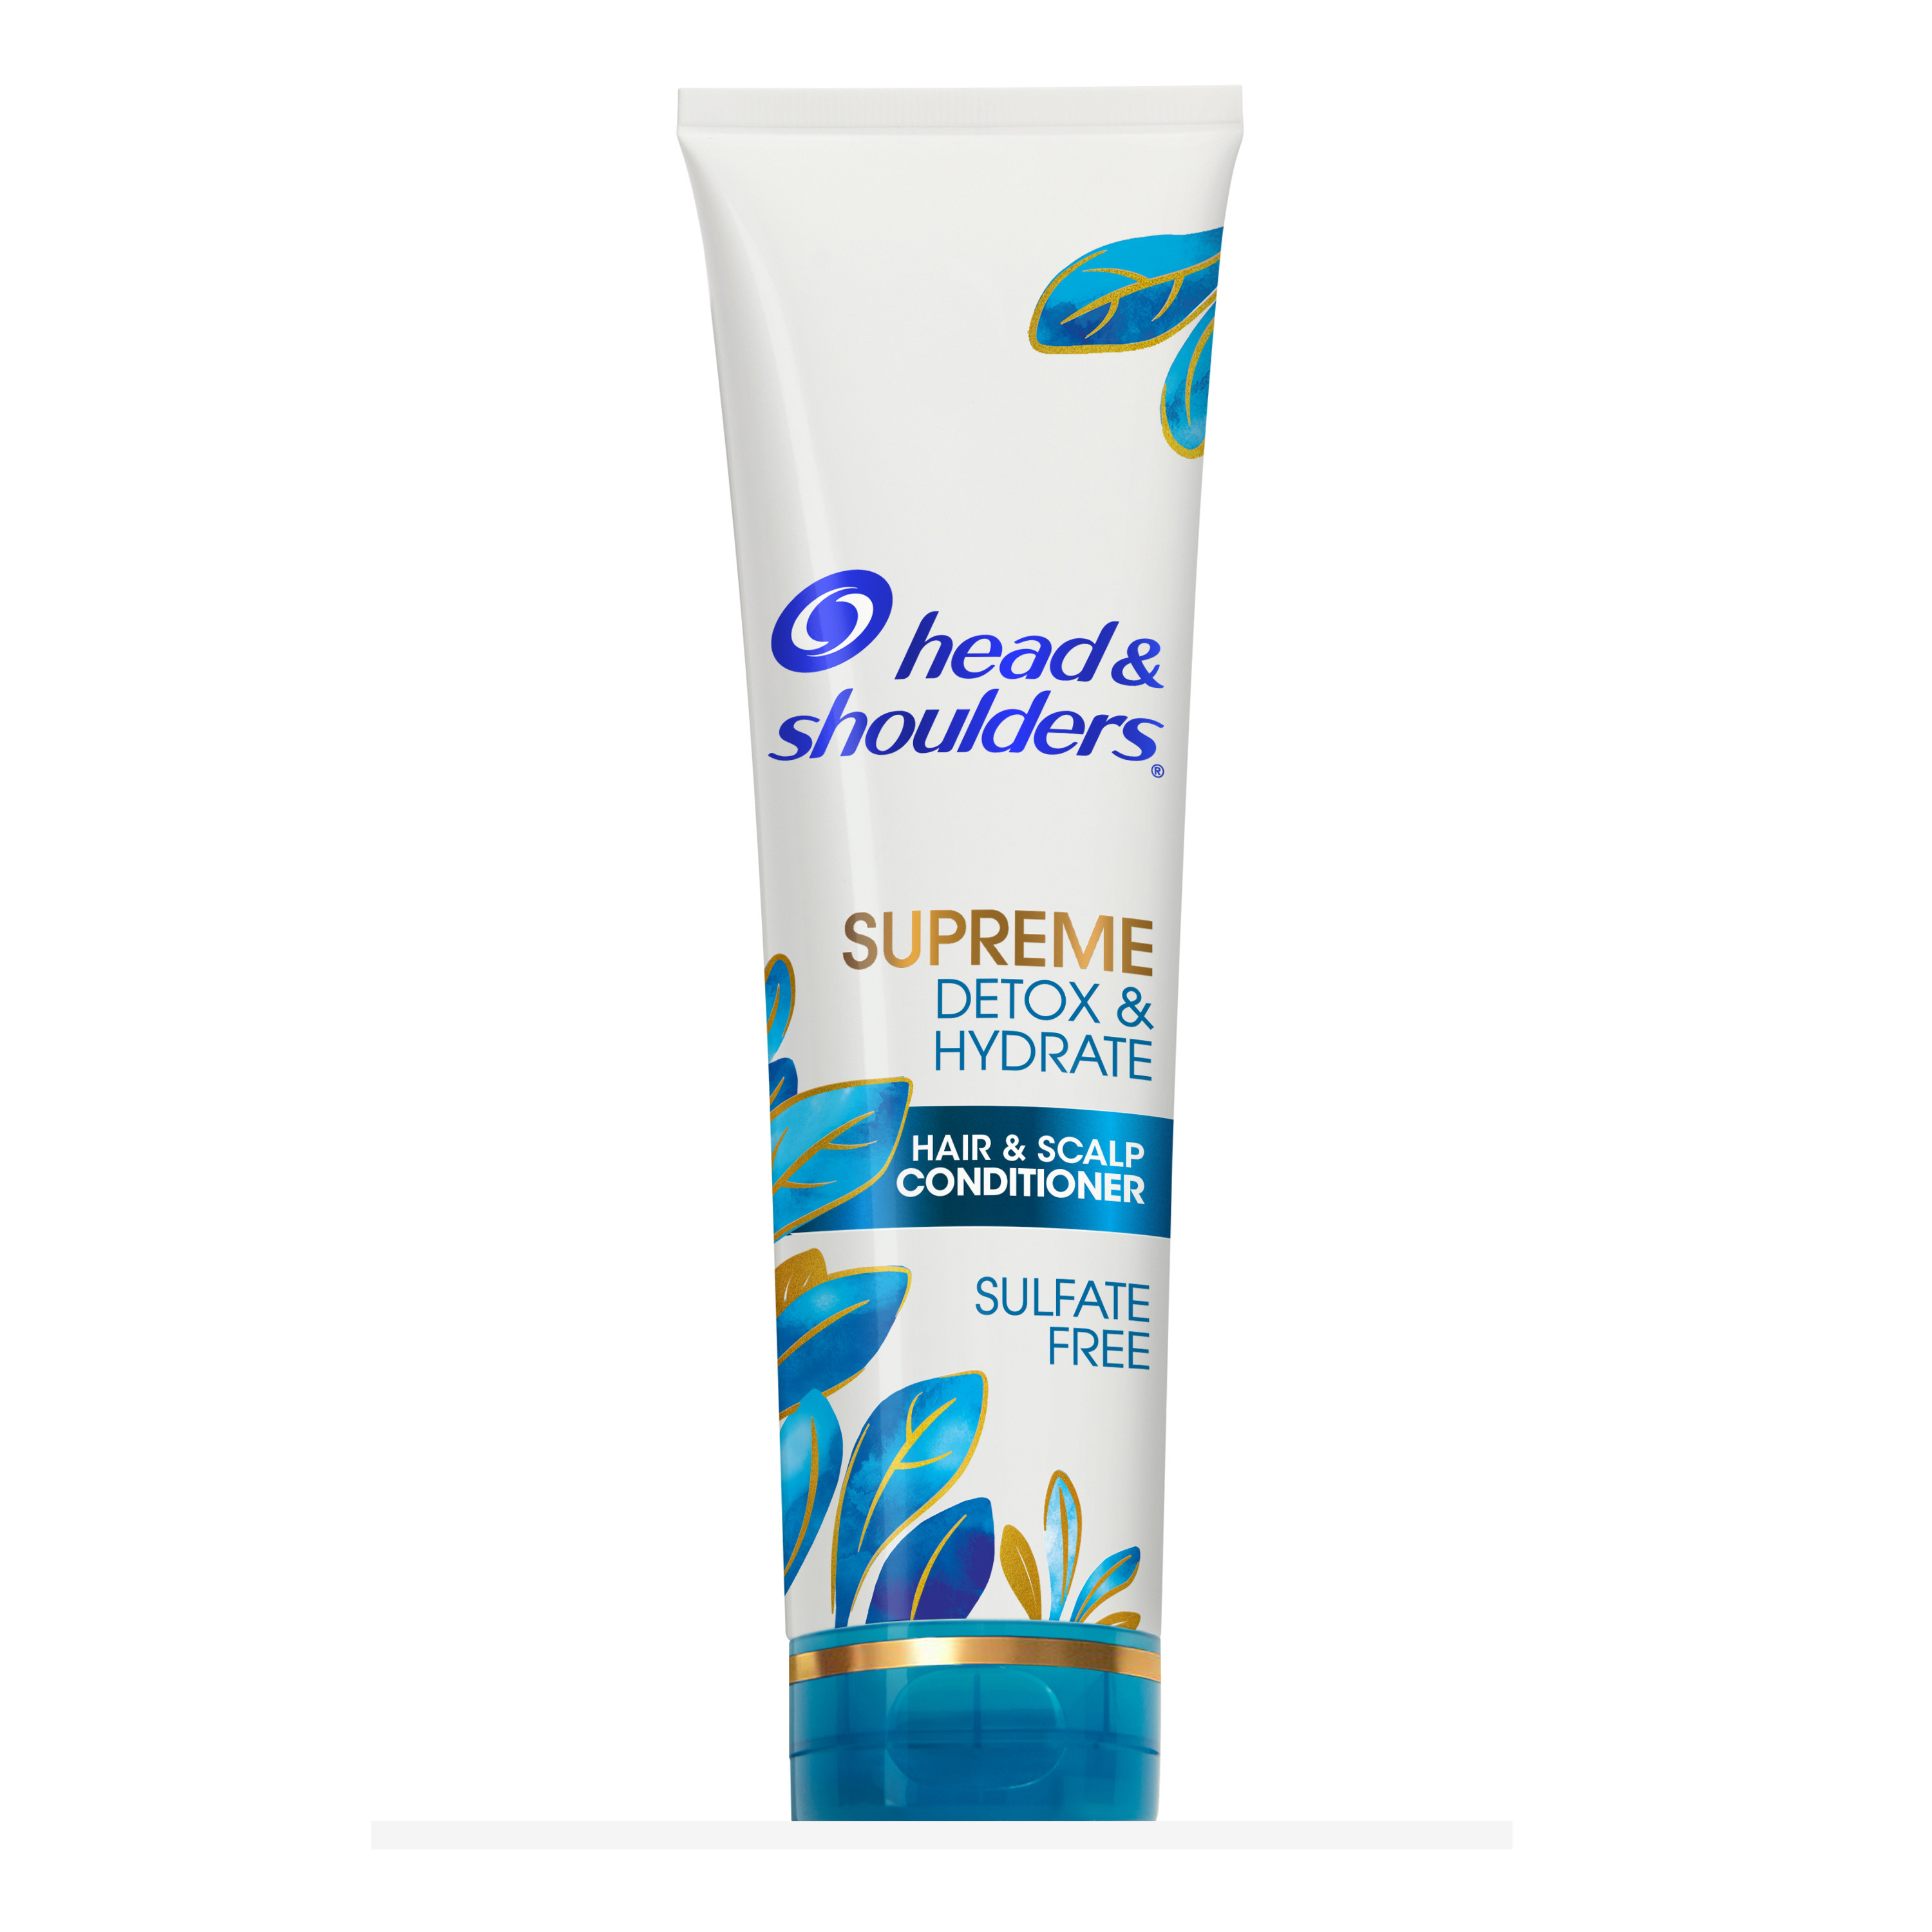 Head & Shoulders Supreme Conditioner, Detox and Hydrate, for All Hair Types, 9.4 fl oz - image 1 of 10